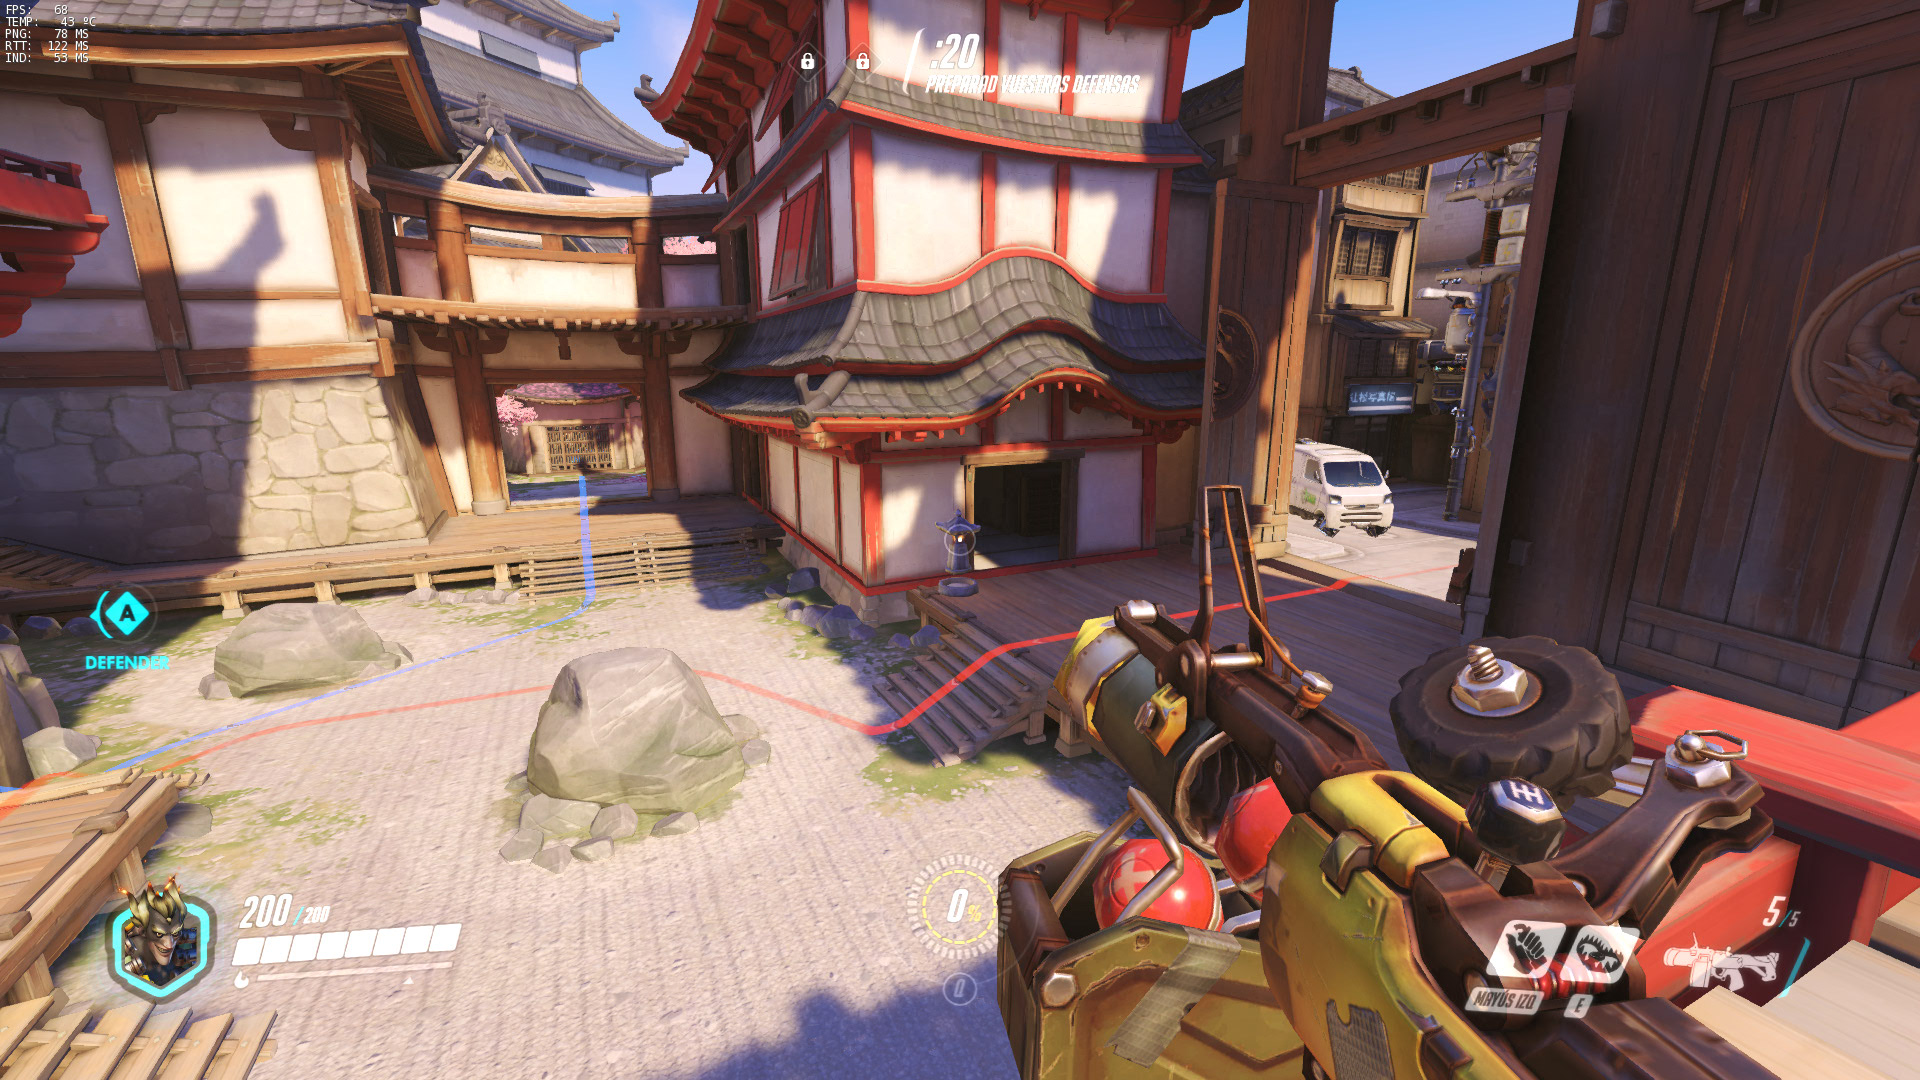 Overwatch conveys information to the player in a smooth, non-intrusive way.